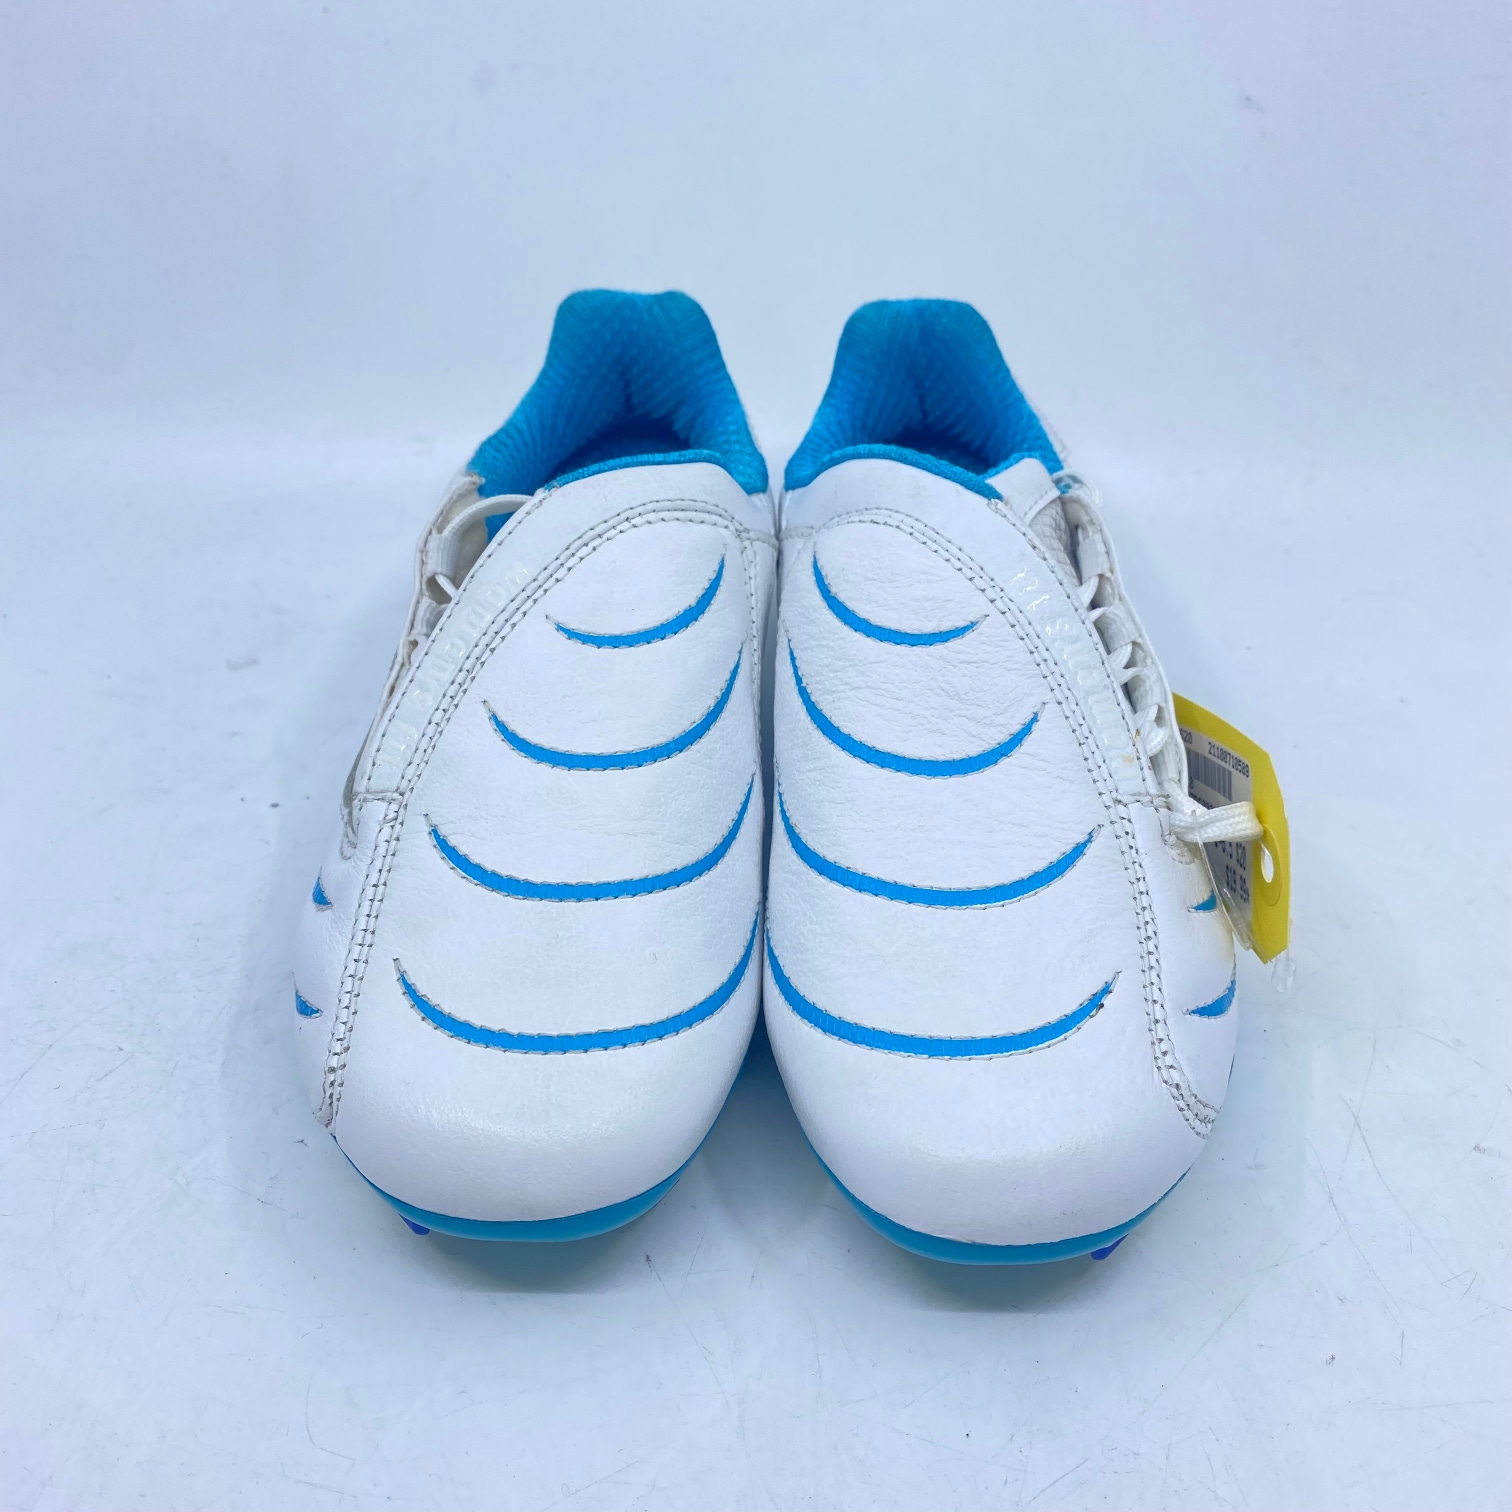 Blue Women's Used Size 5.0 (Women's 6.0) Molded Cleats Puma PWR-C2 Cleats